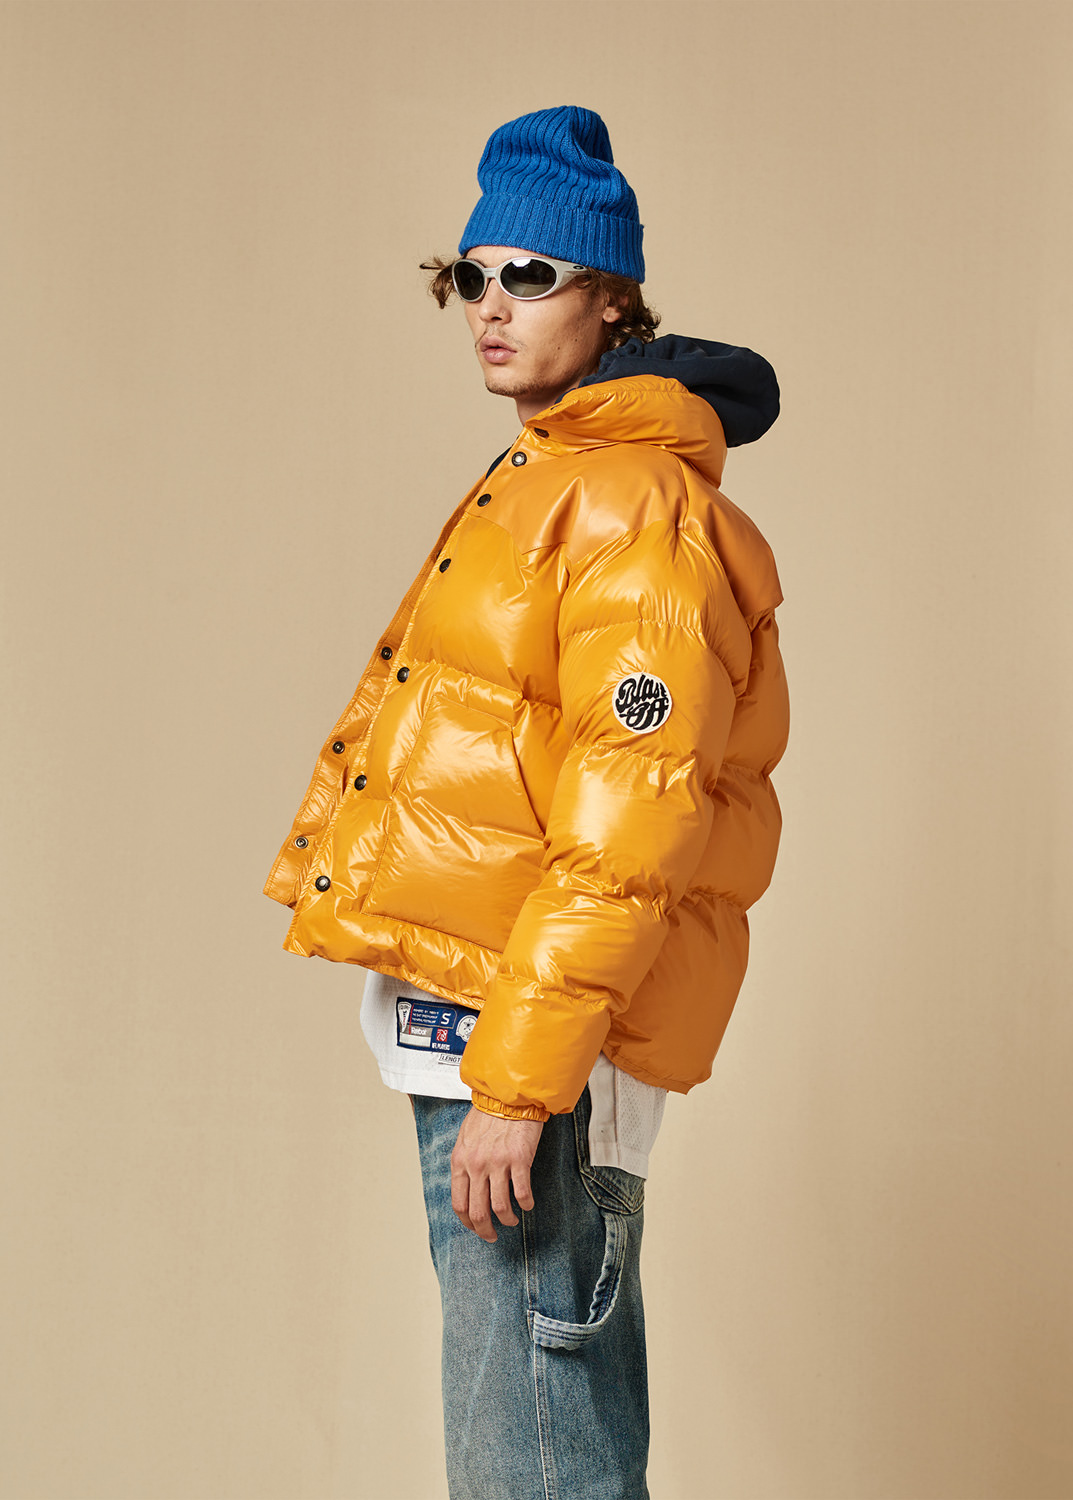 BLAST-OFF: QUILTED DOWN JACKET